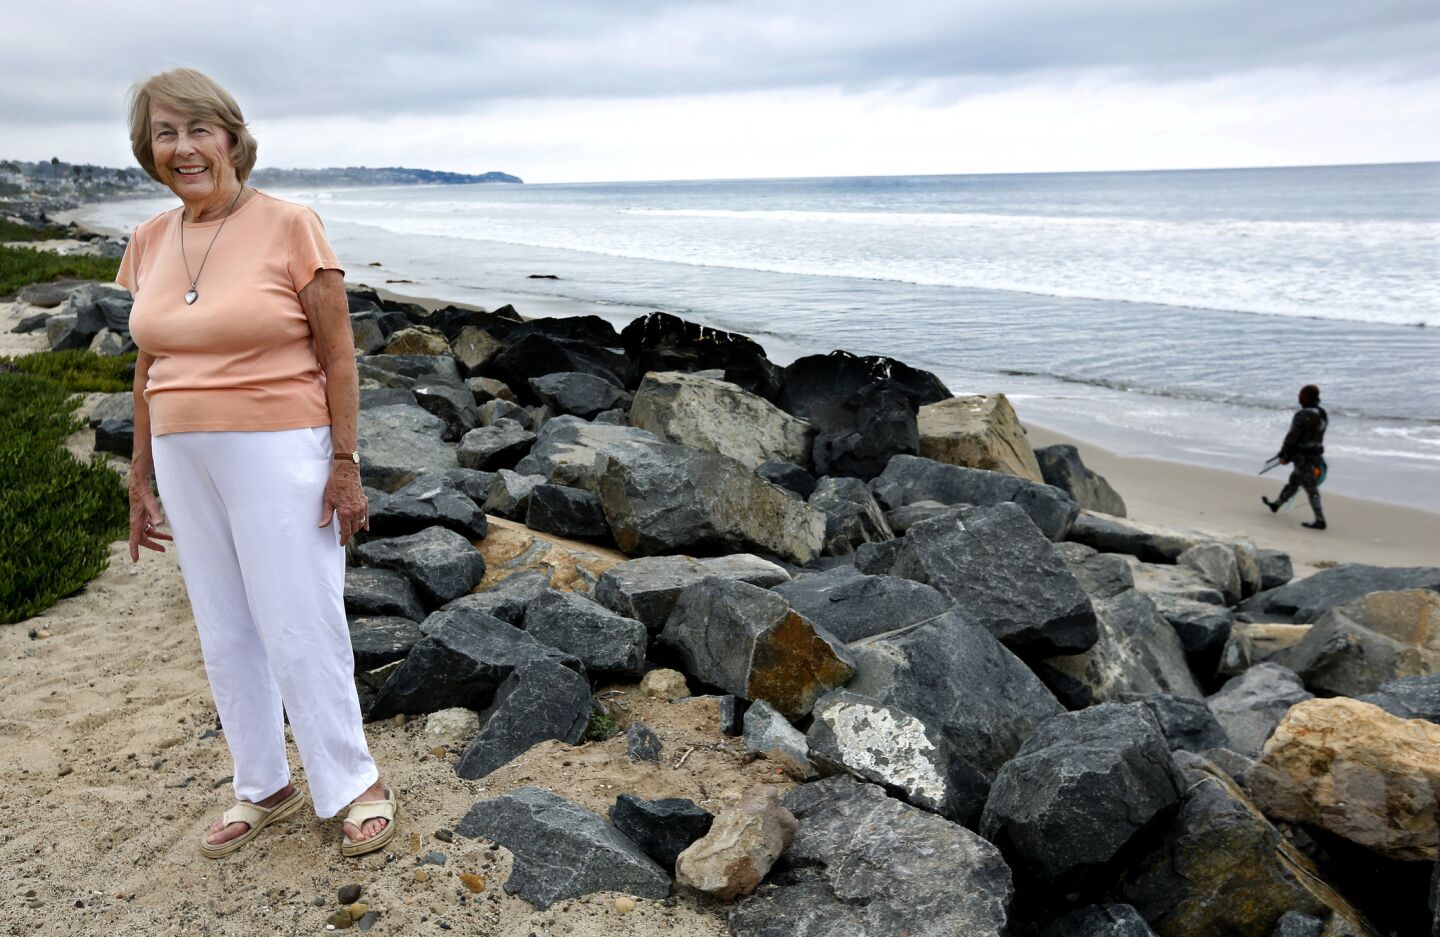 Wini Lumsden of Broad Beach, Malibu, stands next to a rock revetment designed to protect her home from water damage. A sand replenishment project will create 50 to 60 feet of restored dune over the revetment and 60 to 70 feet of restored beach.